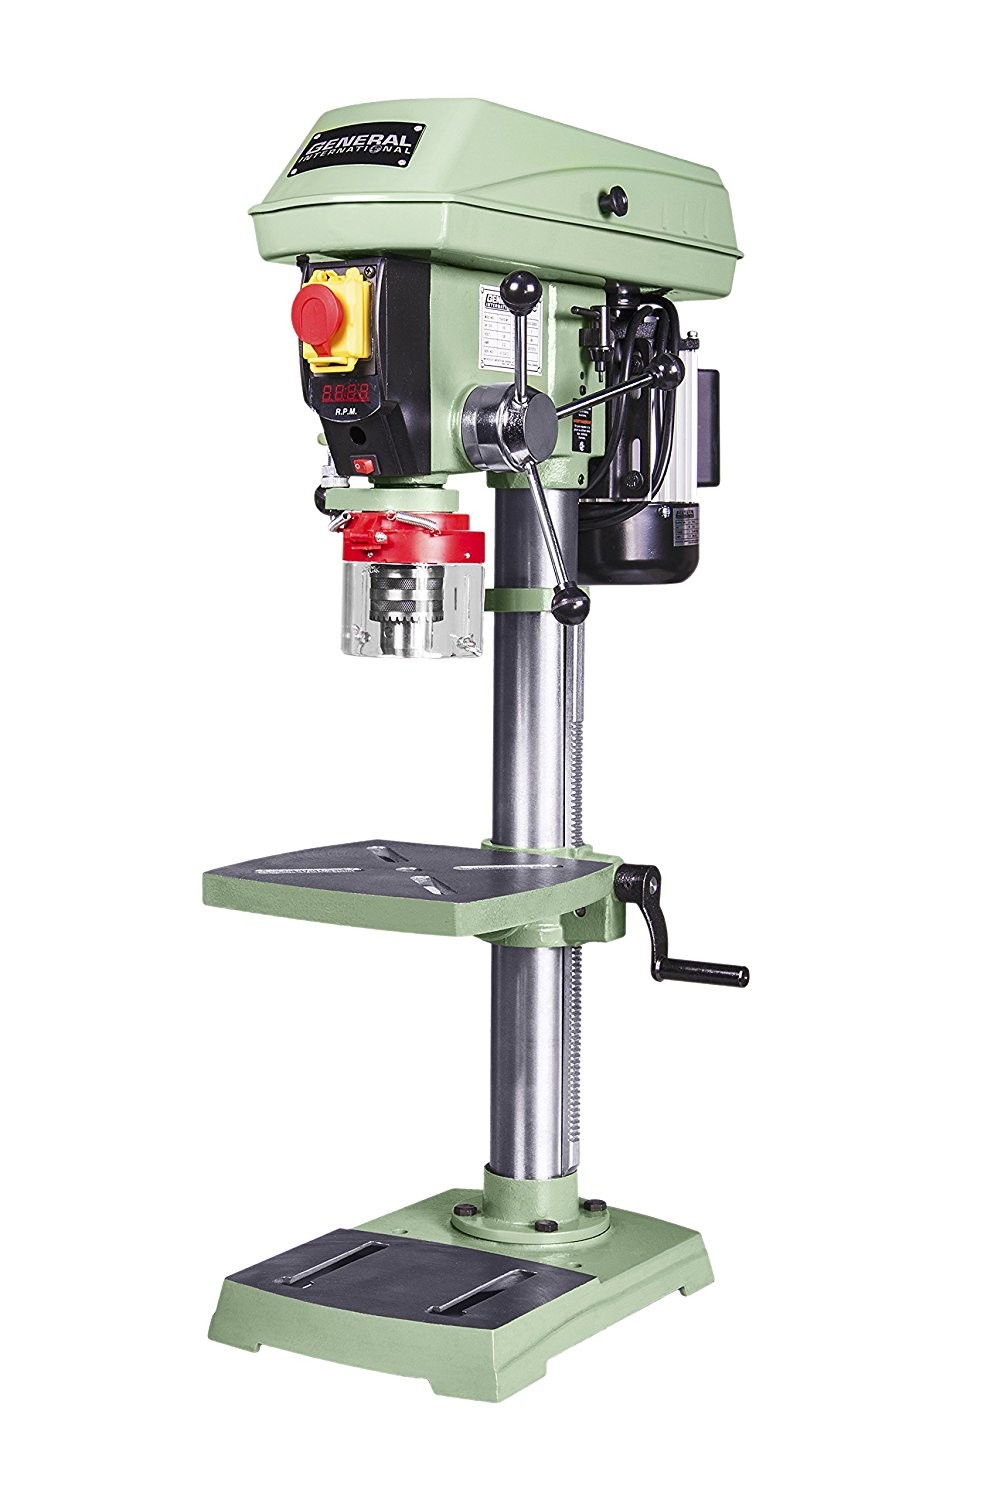 General International 75-010 M1 Power Products Bench-Top Drill Press, 12